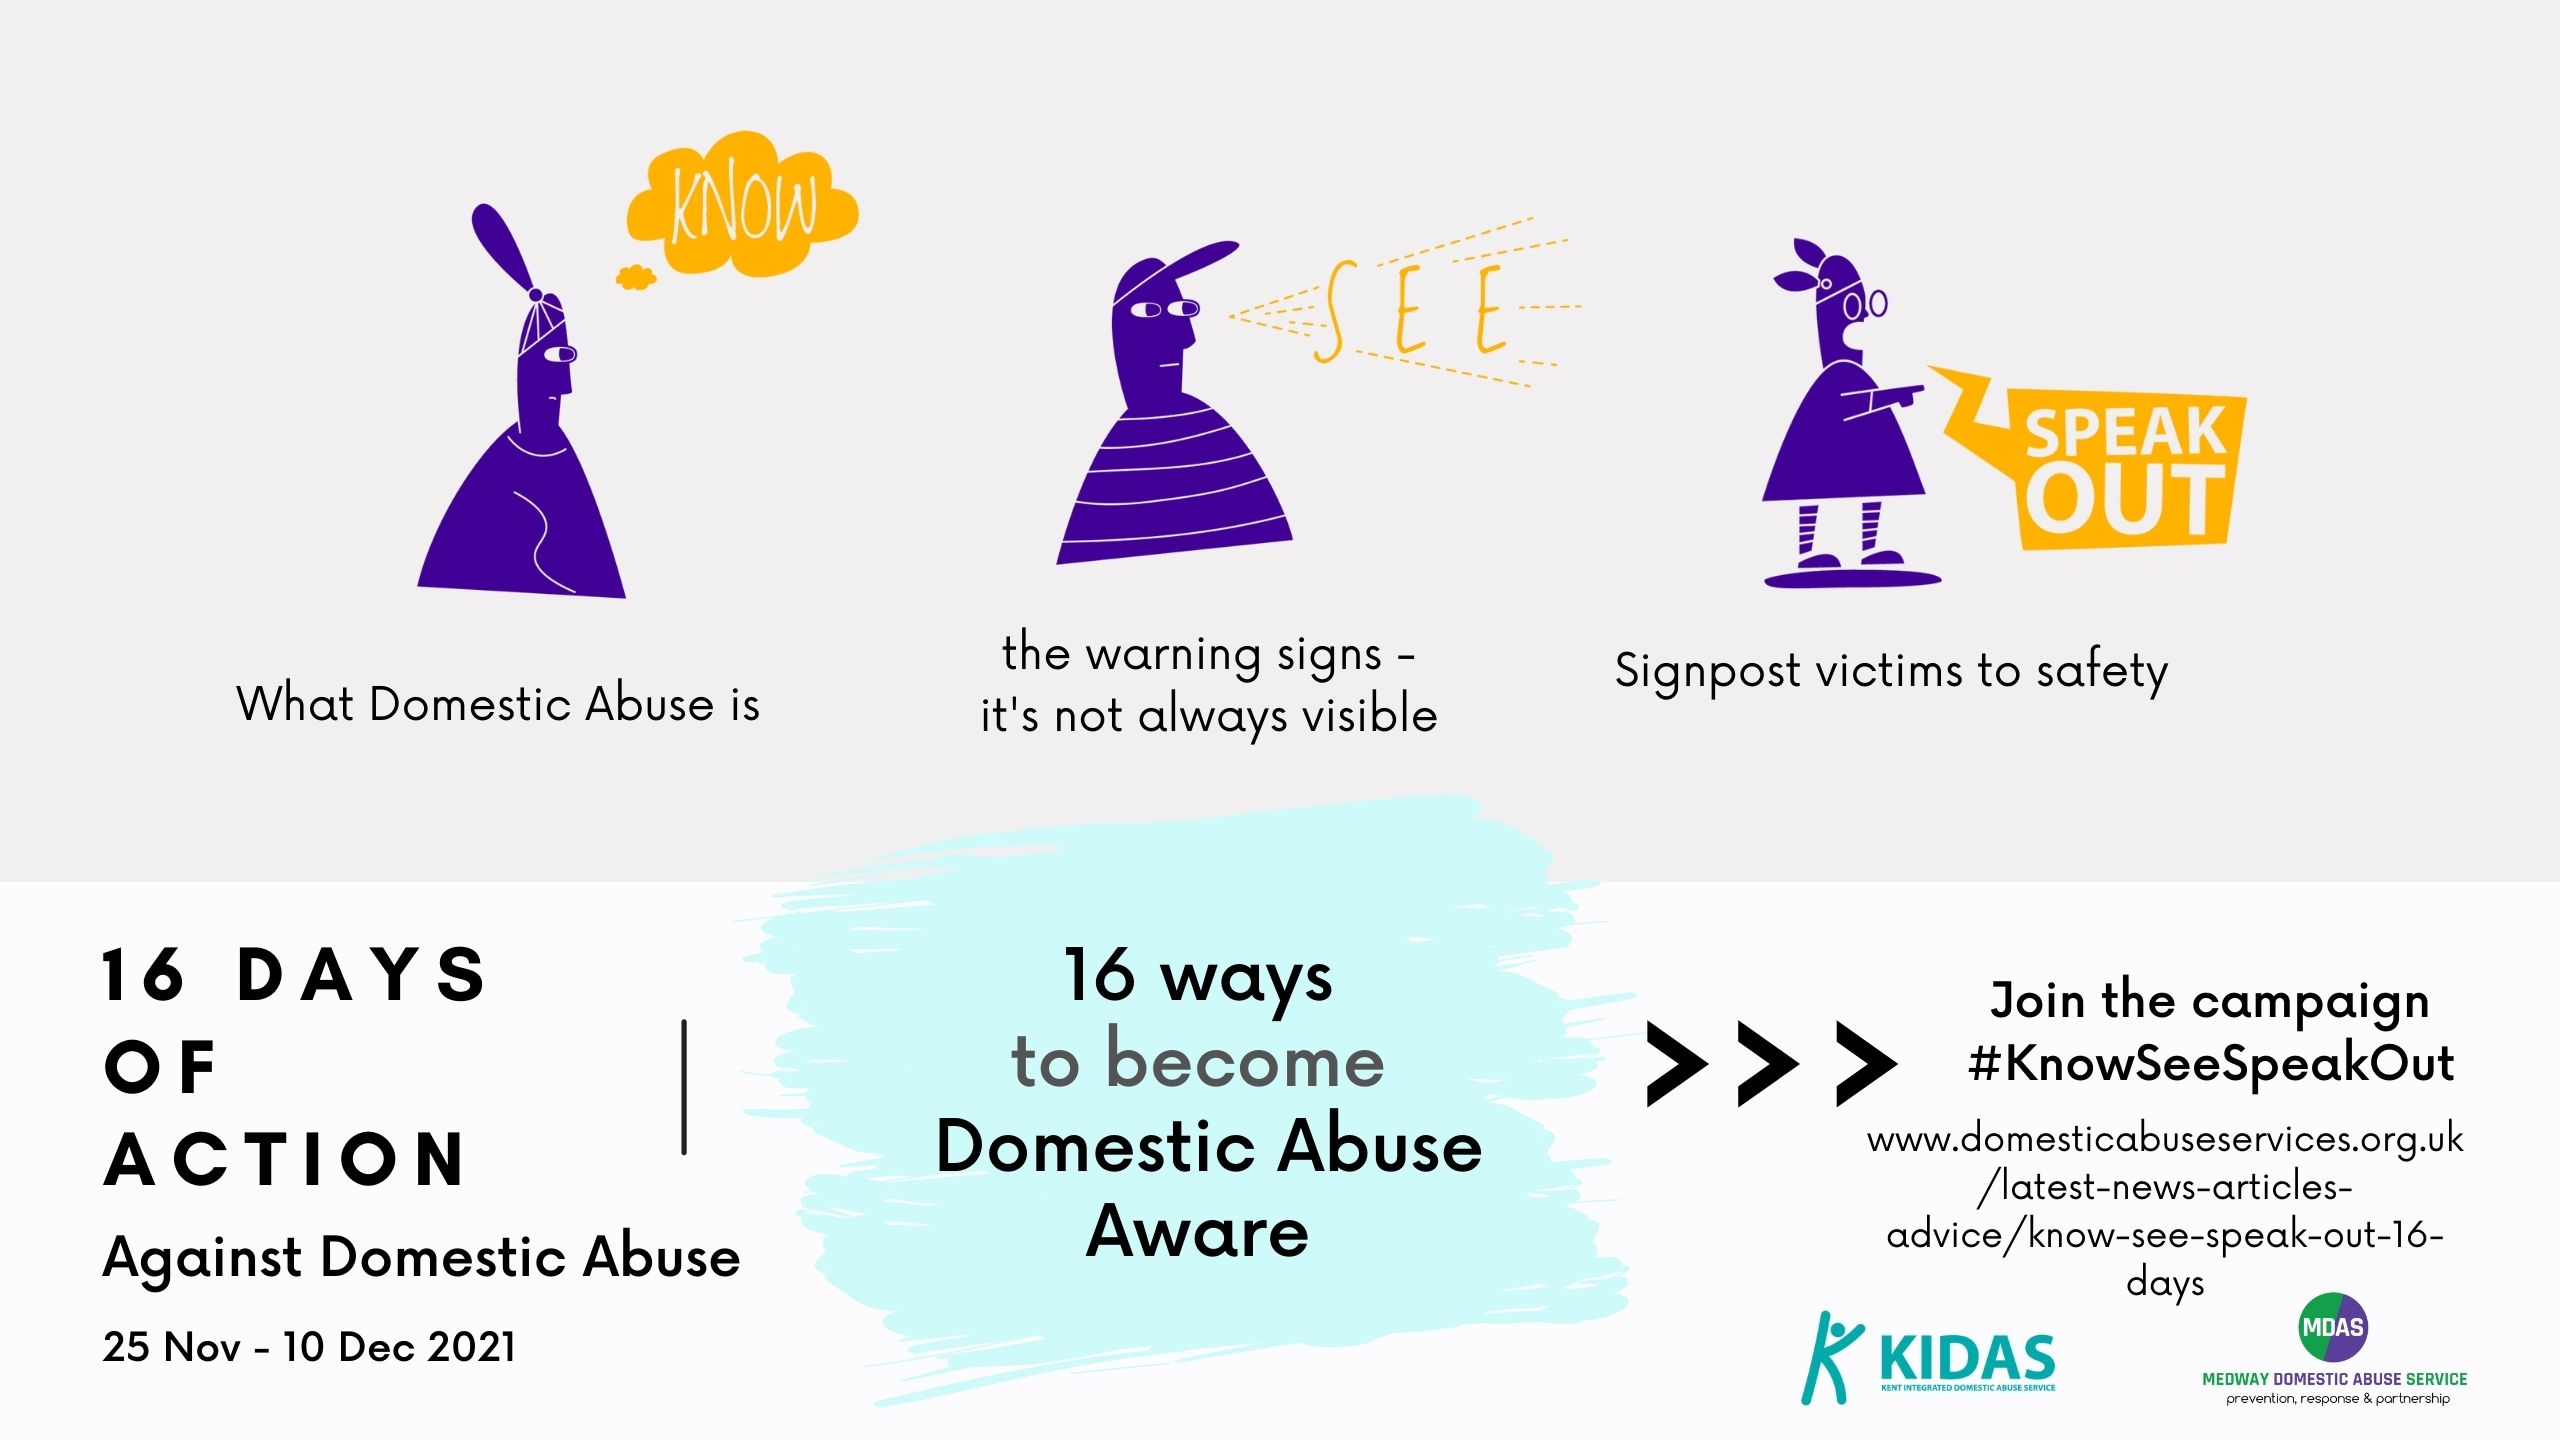 16 Days of Action against Domestic Abuse campaign